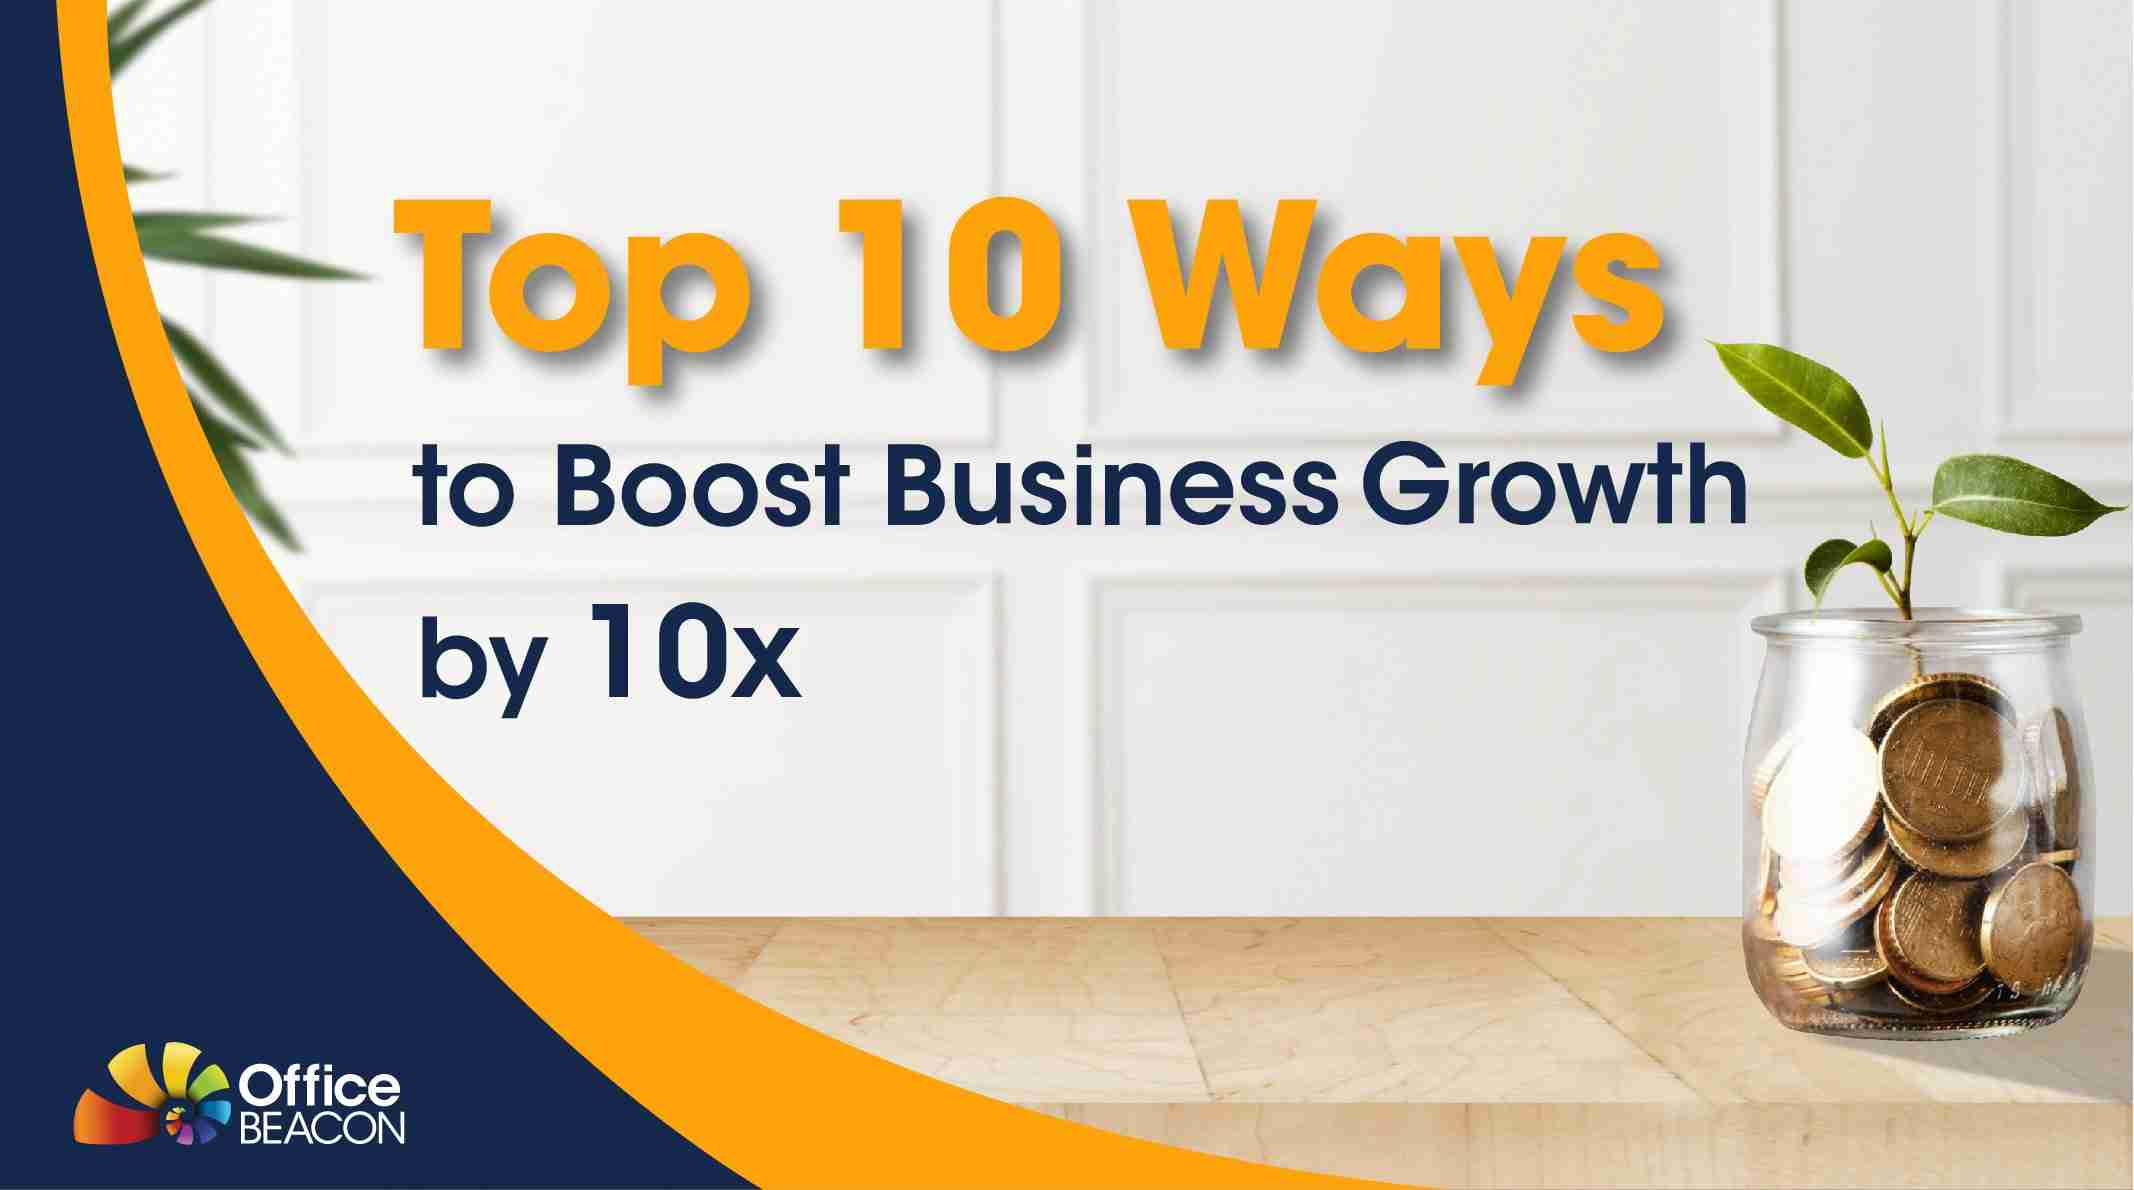 Top 10 ways to Boost Business Growth by 10x